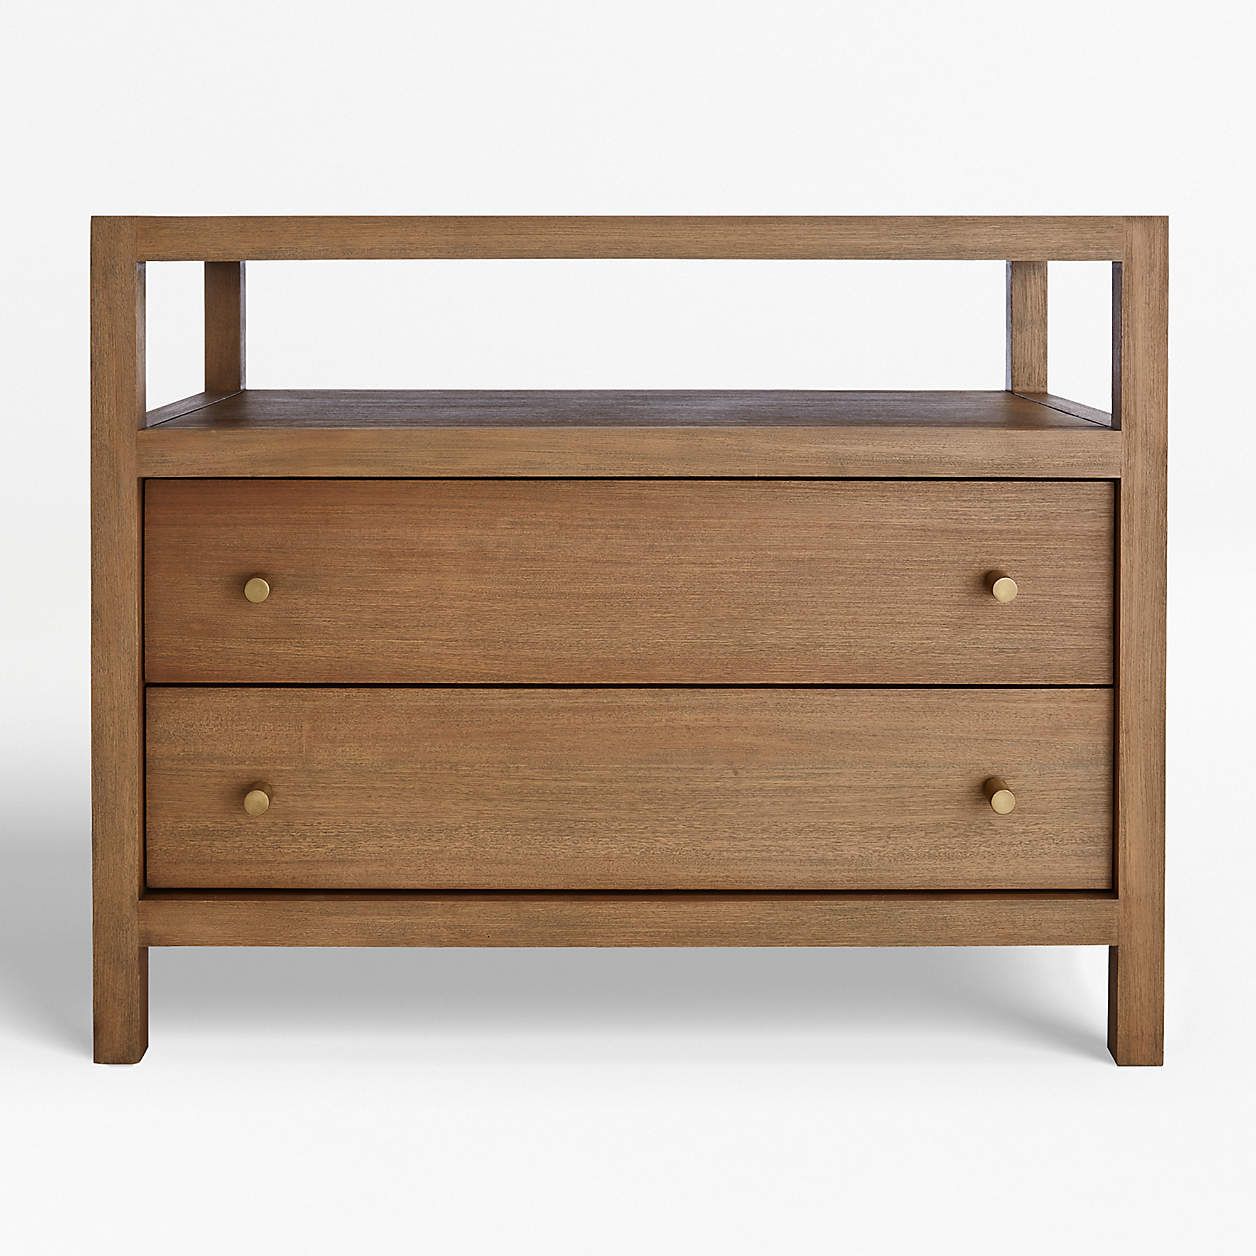 Keane Wenge Solid Wood Charging Nightstand + Reviews | Crate and Barrel | Crate & Barrel